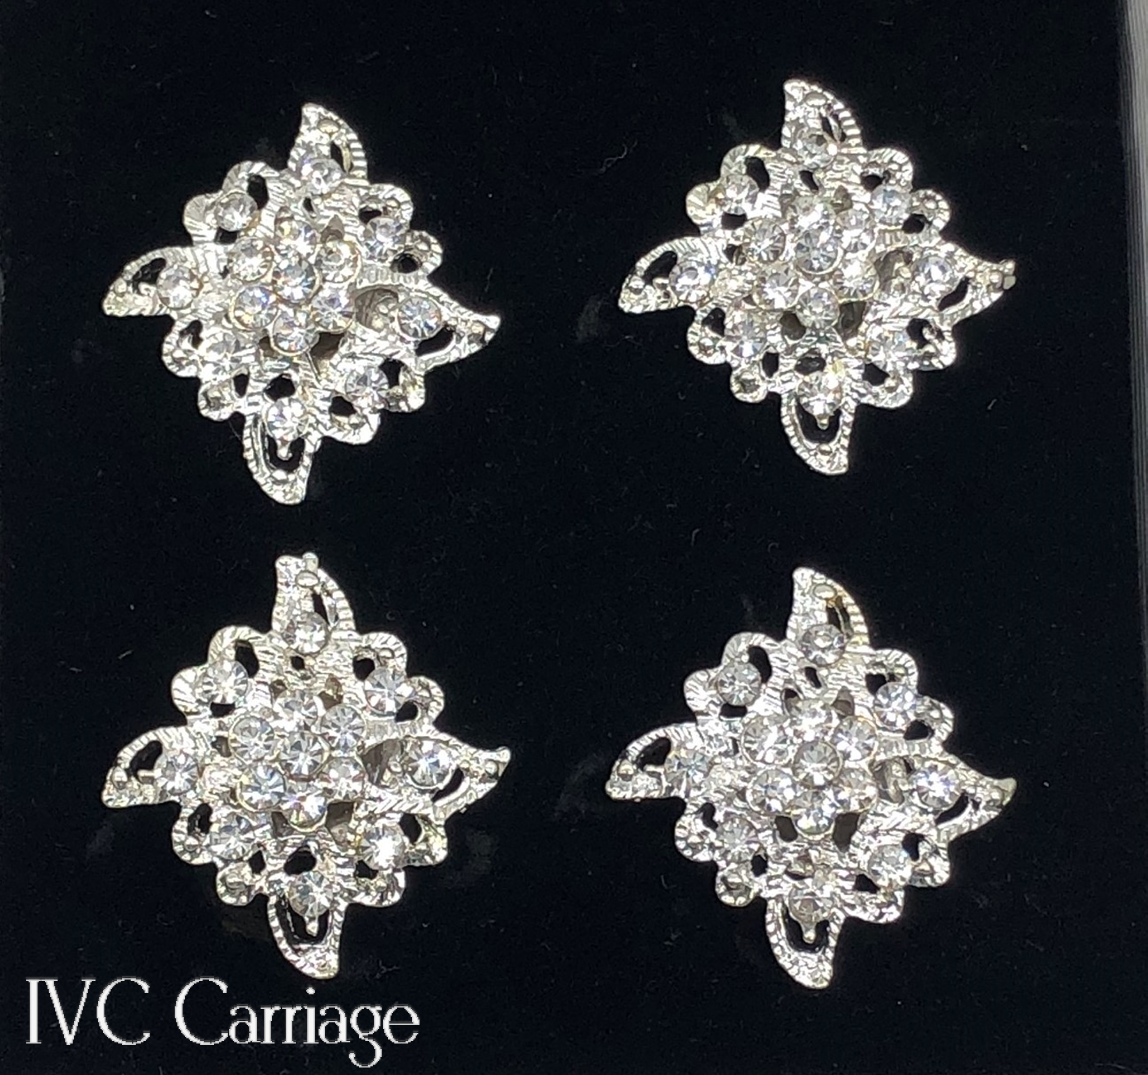 Rhinestone Diamond Magnetic Number Pins | IVC Carriage